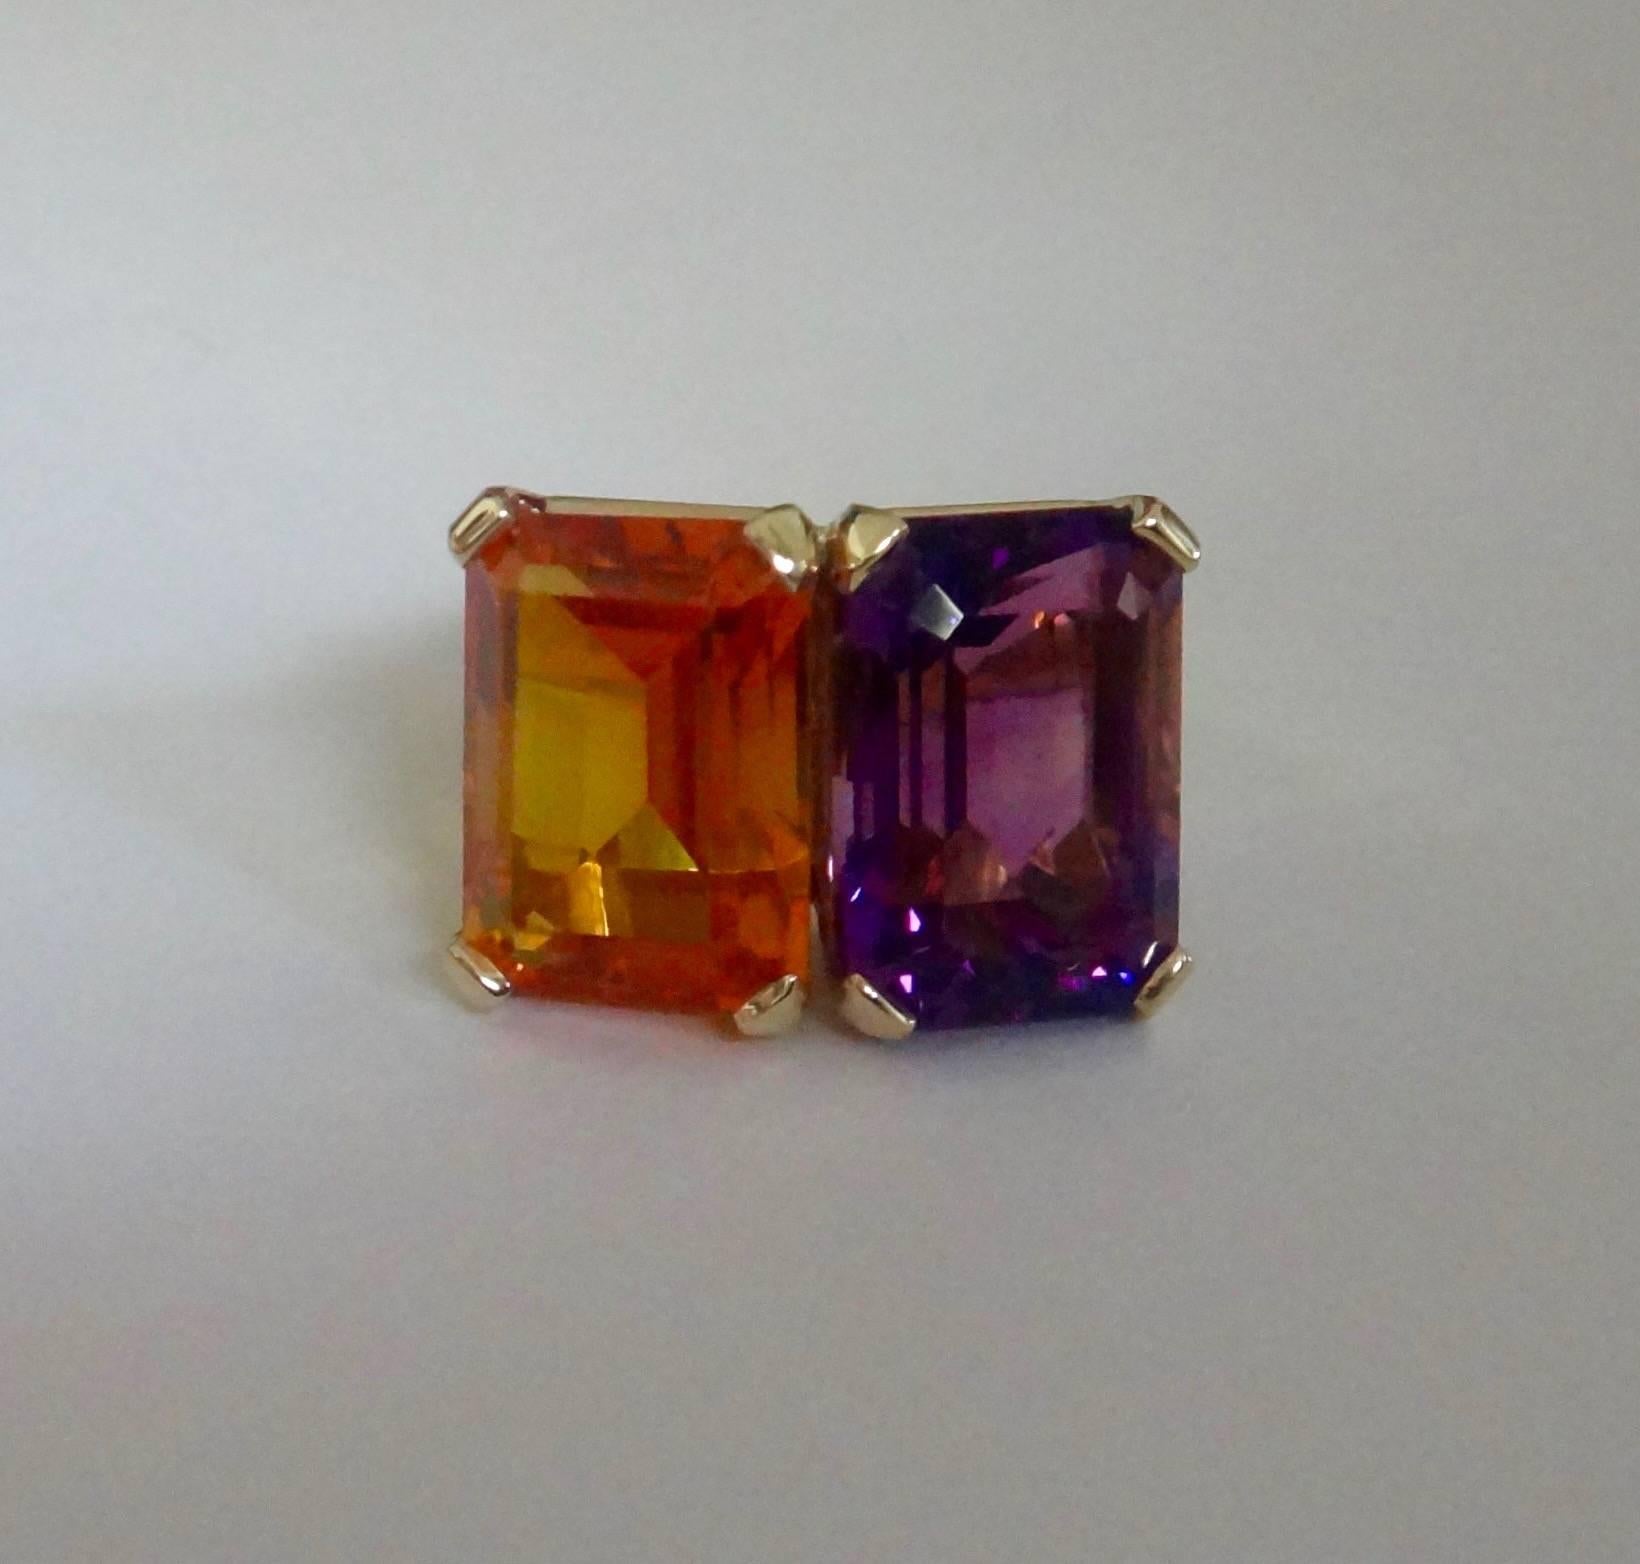 A matched pair of 14 x 10 mm Moroccan amethyst and Rio Grande citrine of highly intense and complimentary colors are set in a hand fabricated 18k yellow gold "Due Pietra" ring. The ring is a size 7 and readily sizable.   